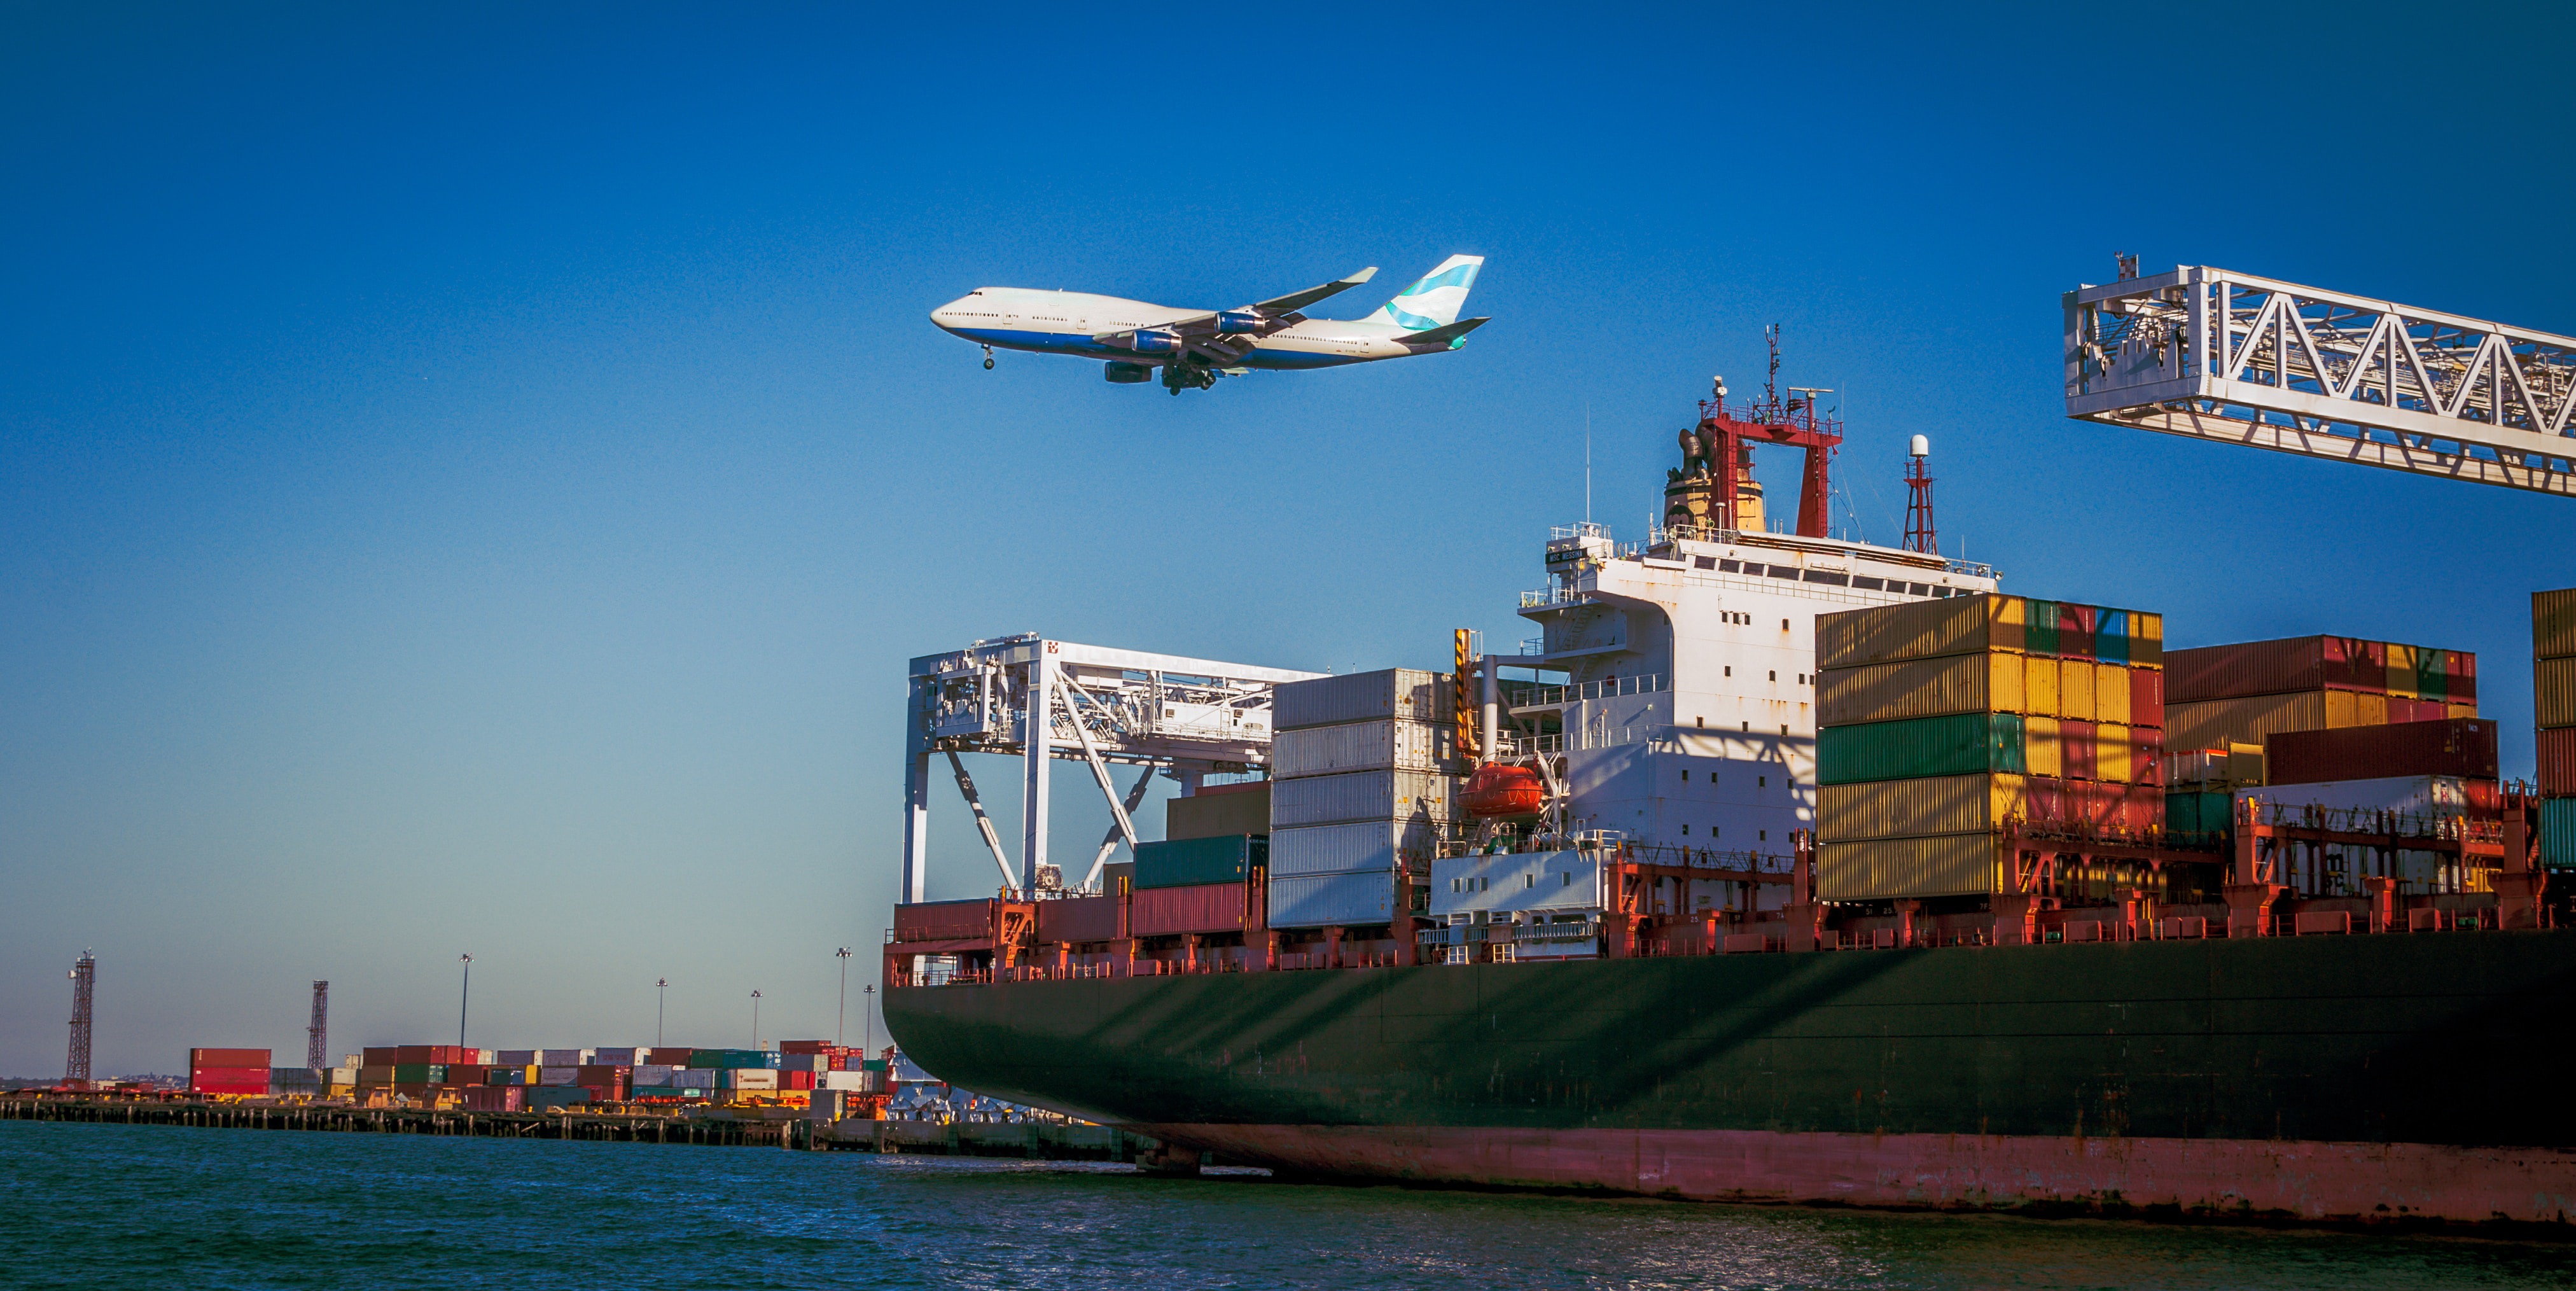 Photo showing a container ship at the port and an airplane in the sky